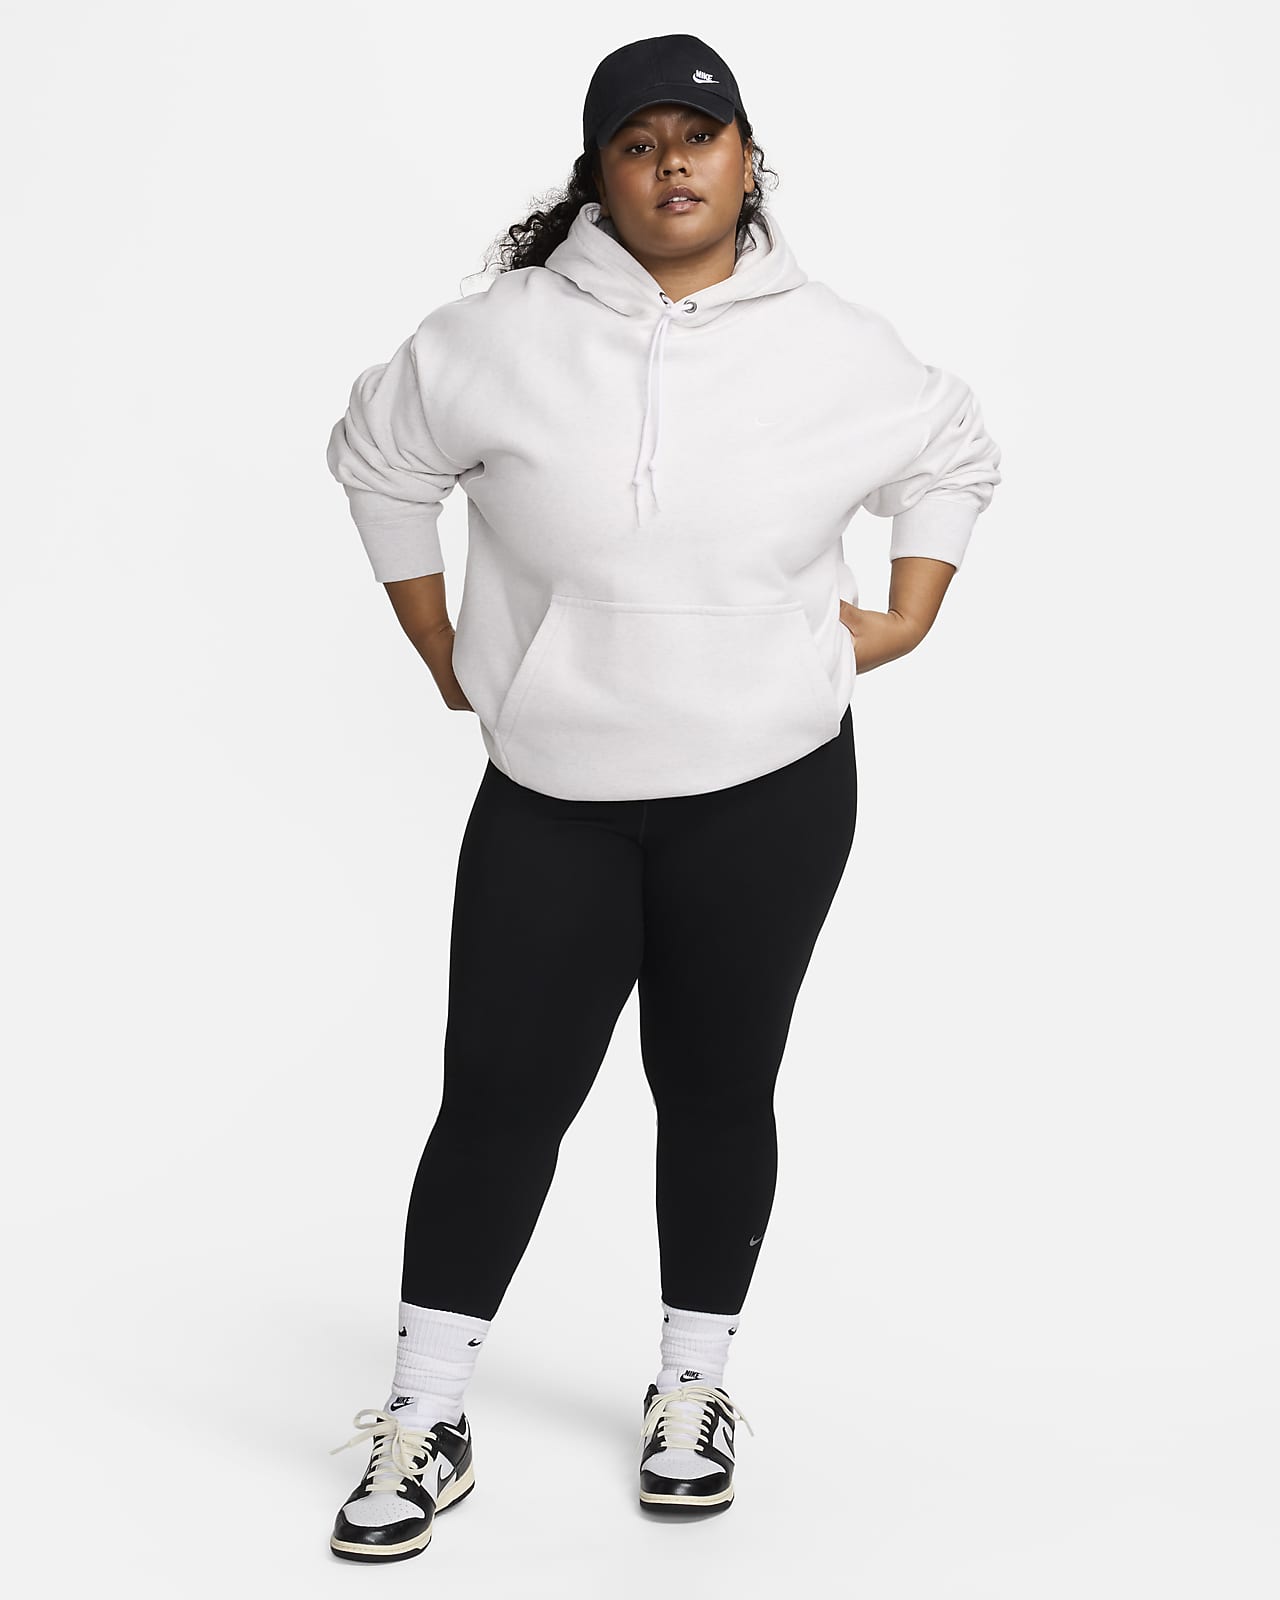 Nike One Women's High-Waisted 7/8 Leggings with Pockets (Plus Size